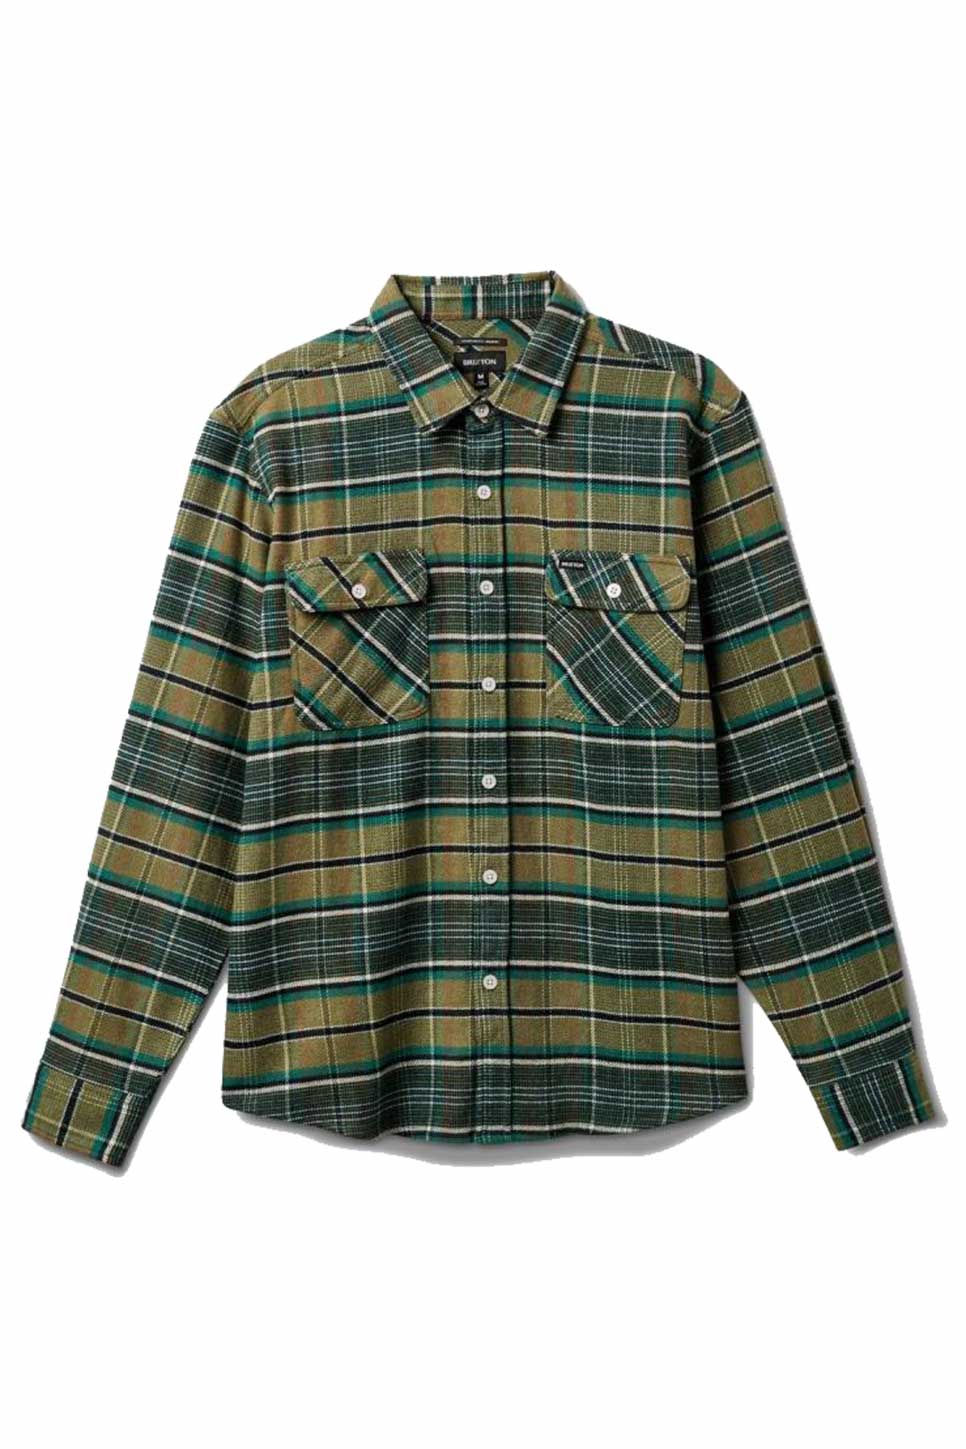 BOWERY FLANNEL SHIRT by BRIXTON